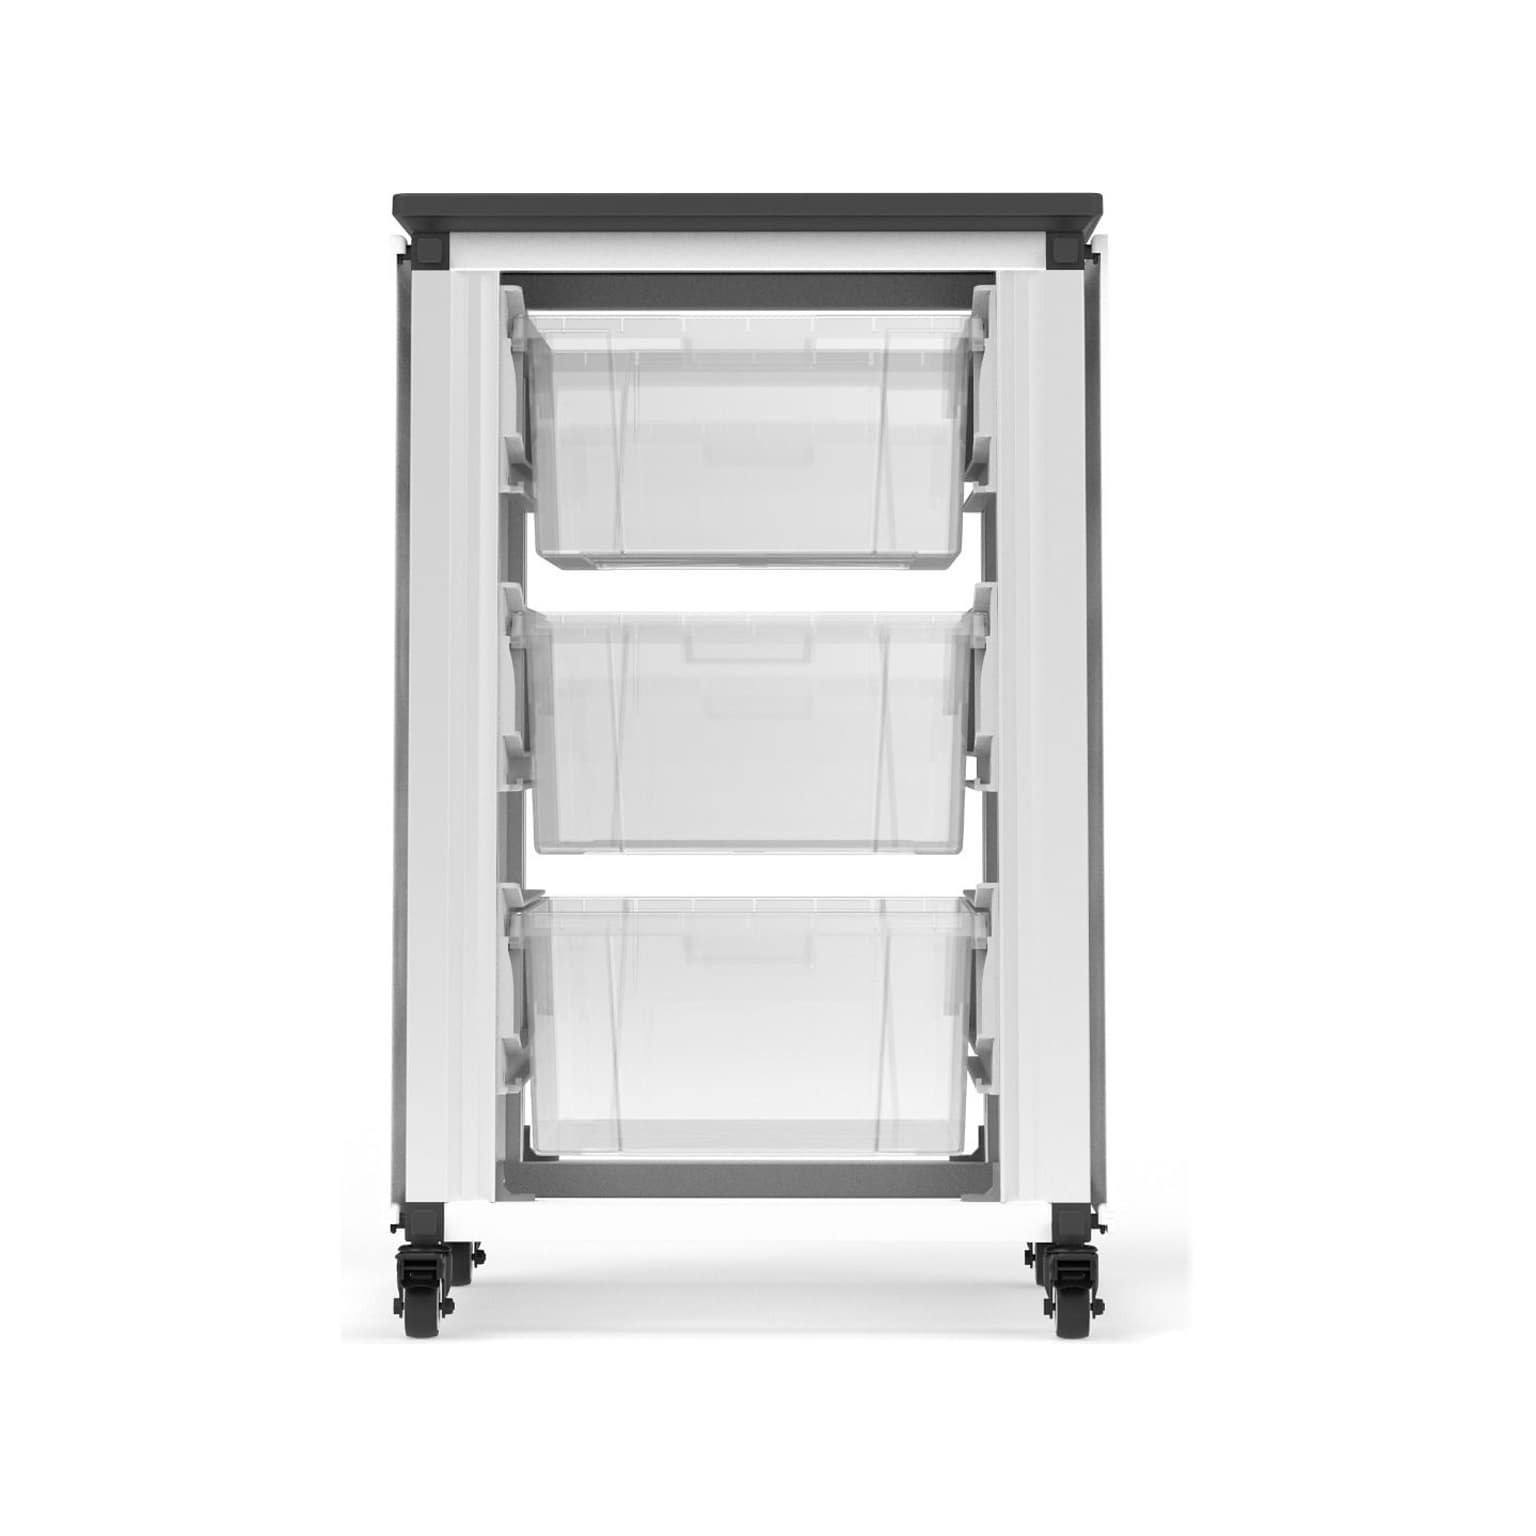 Luxor Mobile 3-Section Modular Classroom Storage Cabinet, 28.75H x 18.2W x 18.2D, White (MBS-STR-11-3L)